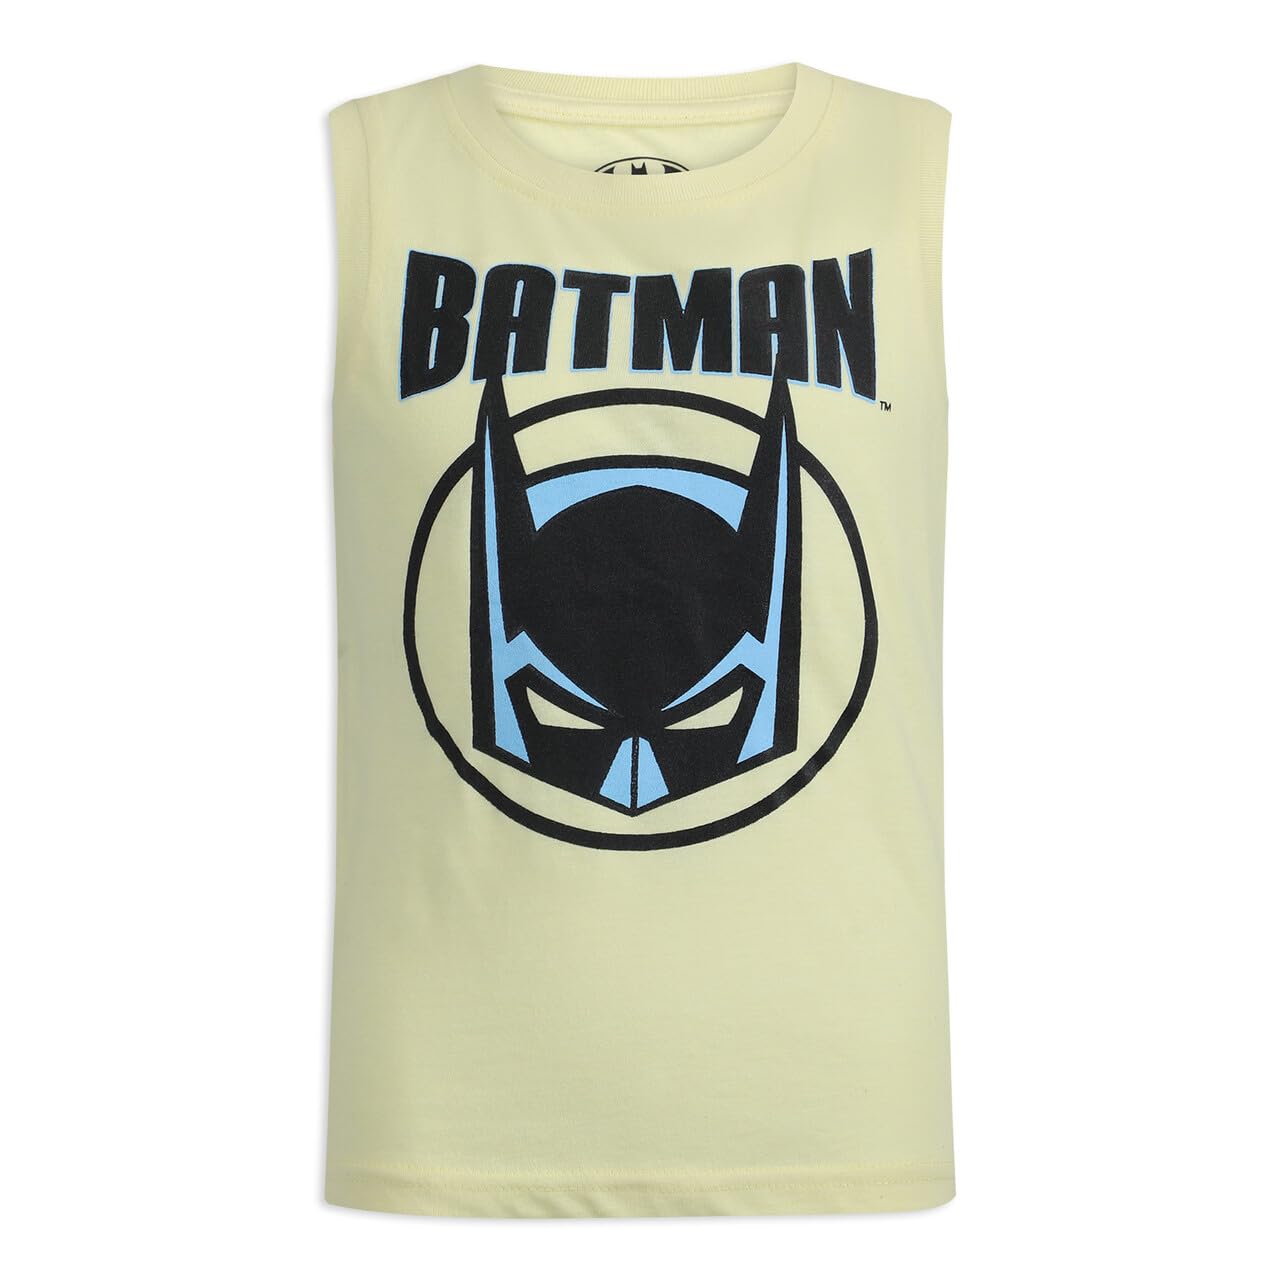 BATMAN DC Comics Boys’ 2 Pack Tank Top for Toddler and Little Boys’ – Yellow/Grey